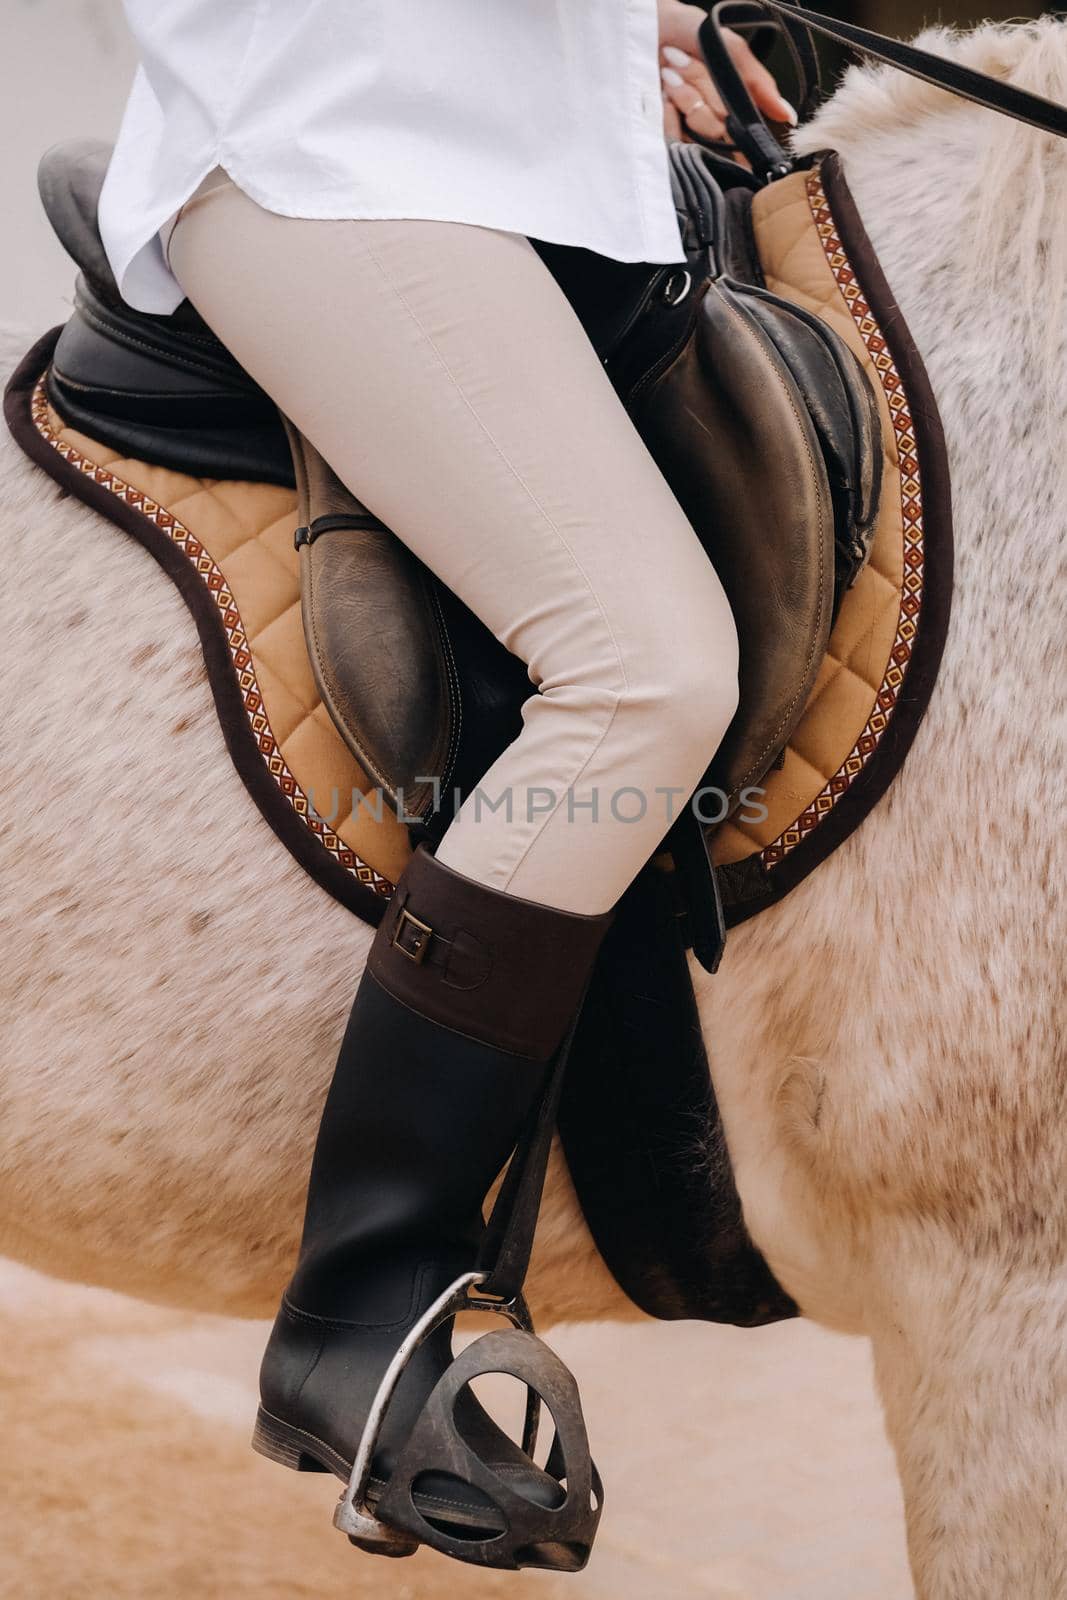 Close-up of a rider's legs in stirrups. A woman on a horse.